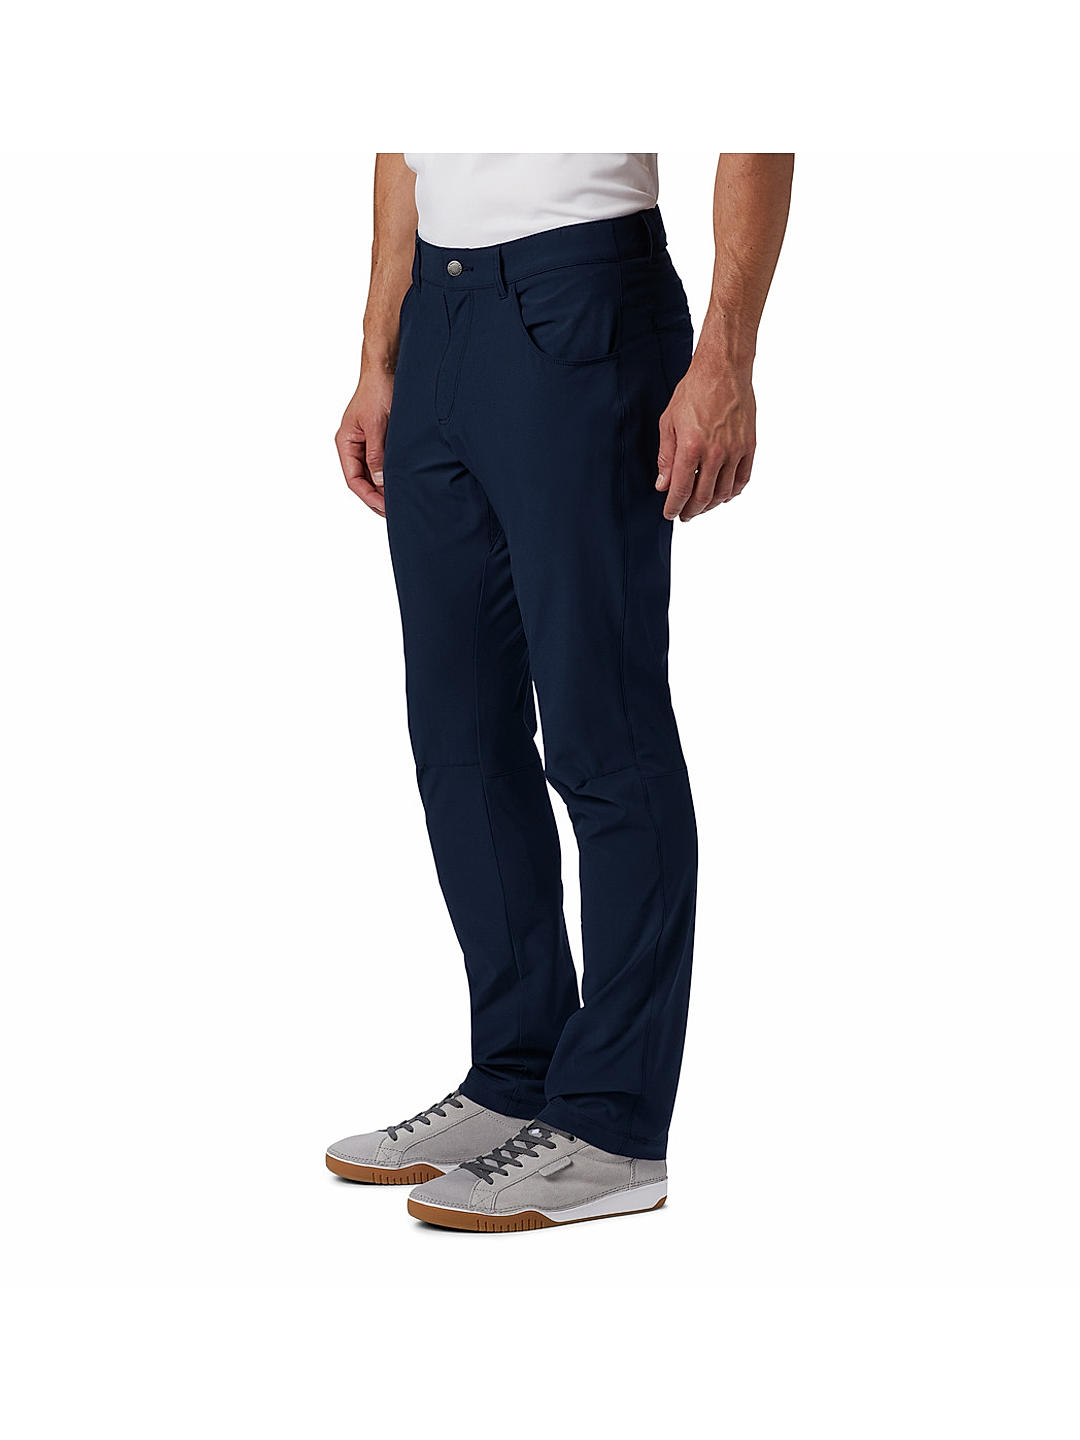 Athletic Fit, Stretch Dress Pants - State and Liberty Clothing Company  Canada